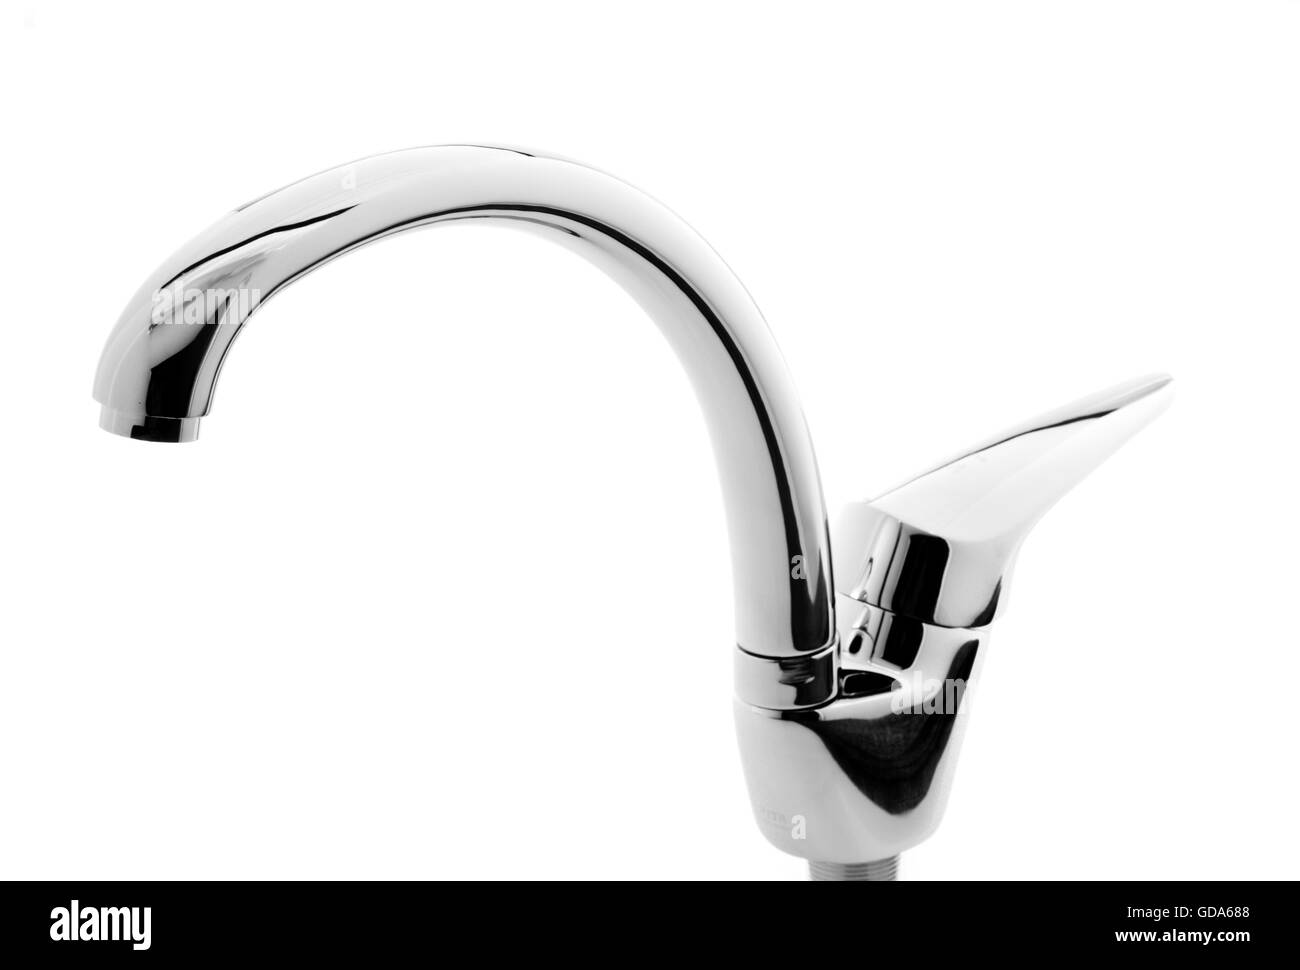 Elegant Water Faucet Isolated on White Background Stock Photo